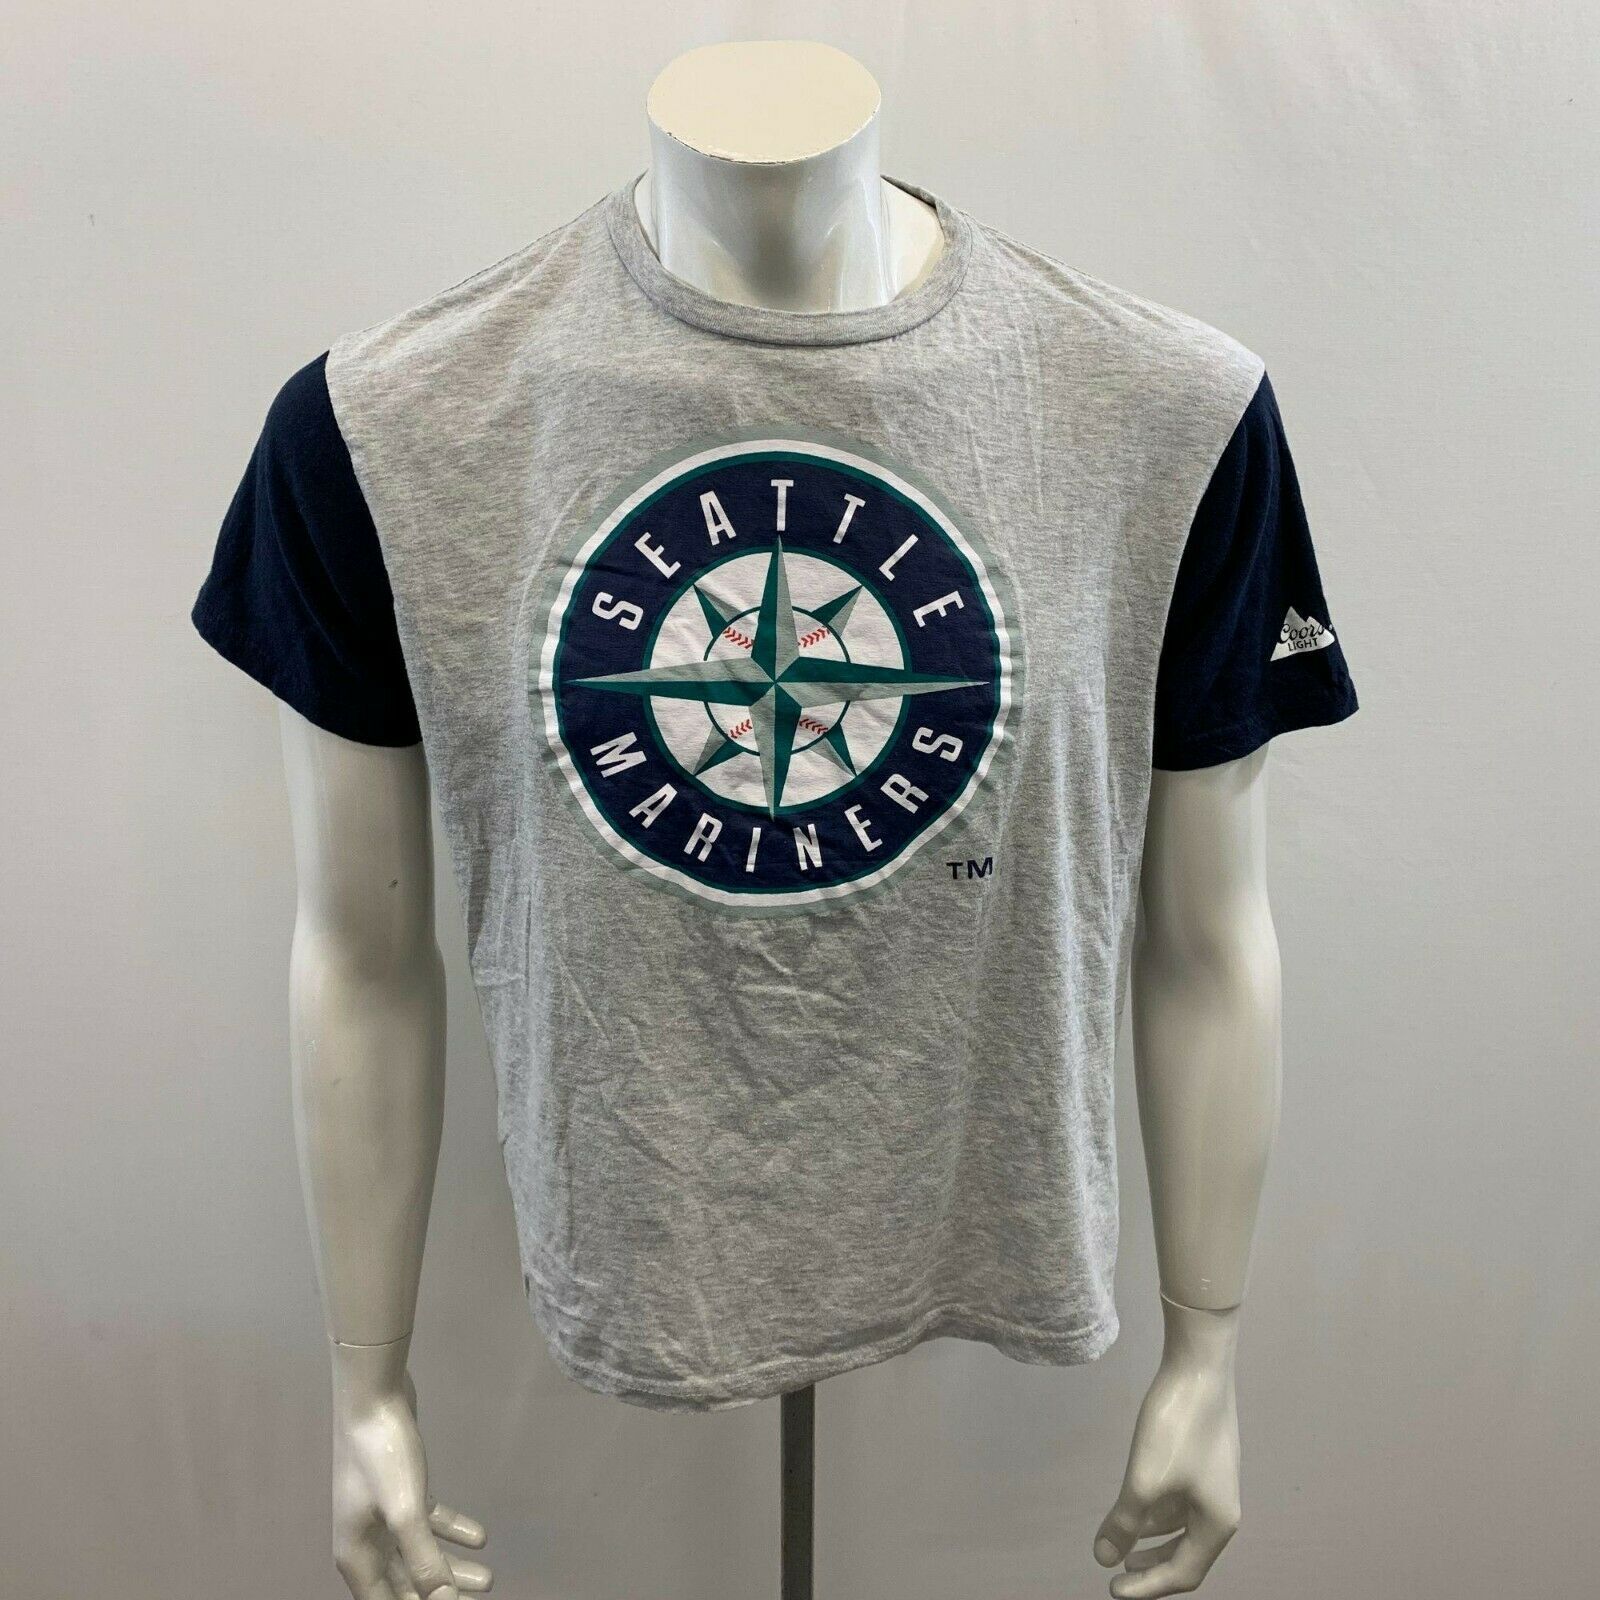 Primary image for Seattle Mariners MLB Baseball Tee Men's Size Large Gray Short Sleeve Graphic T 